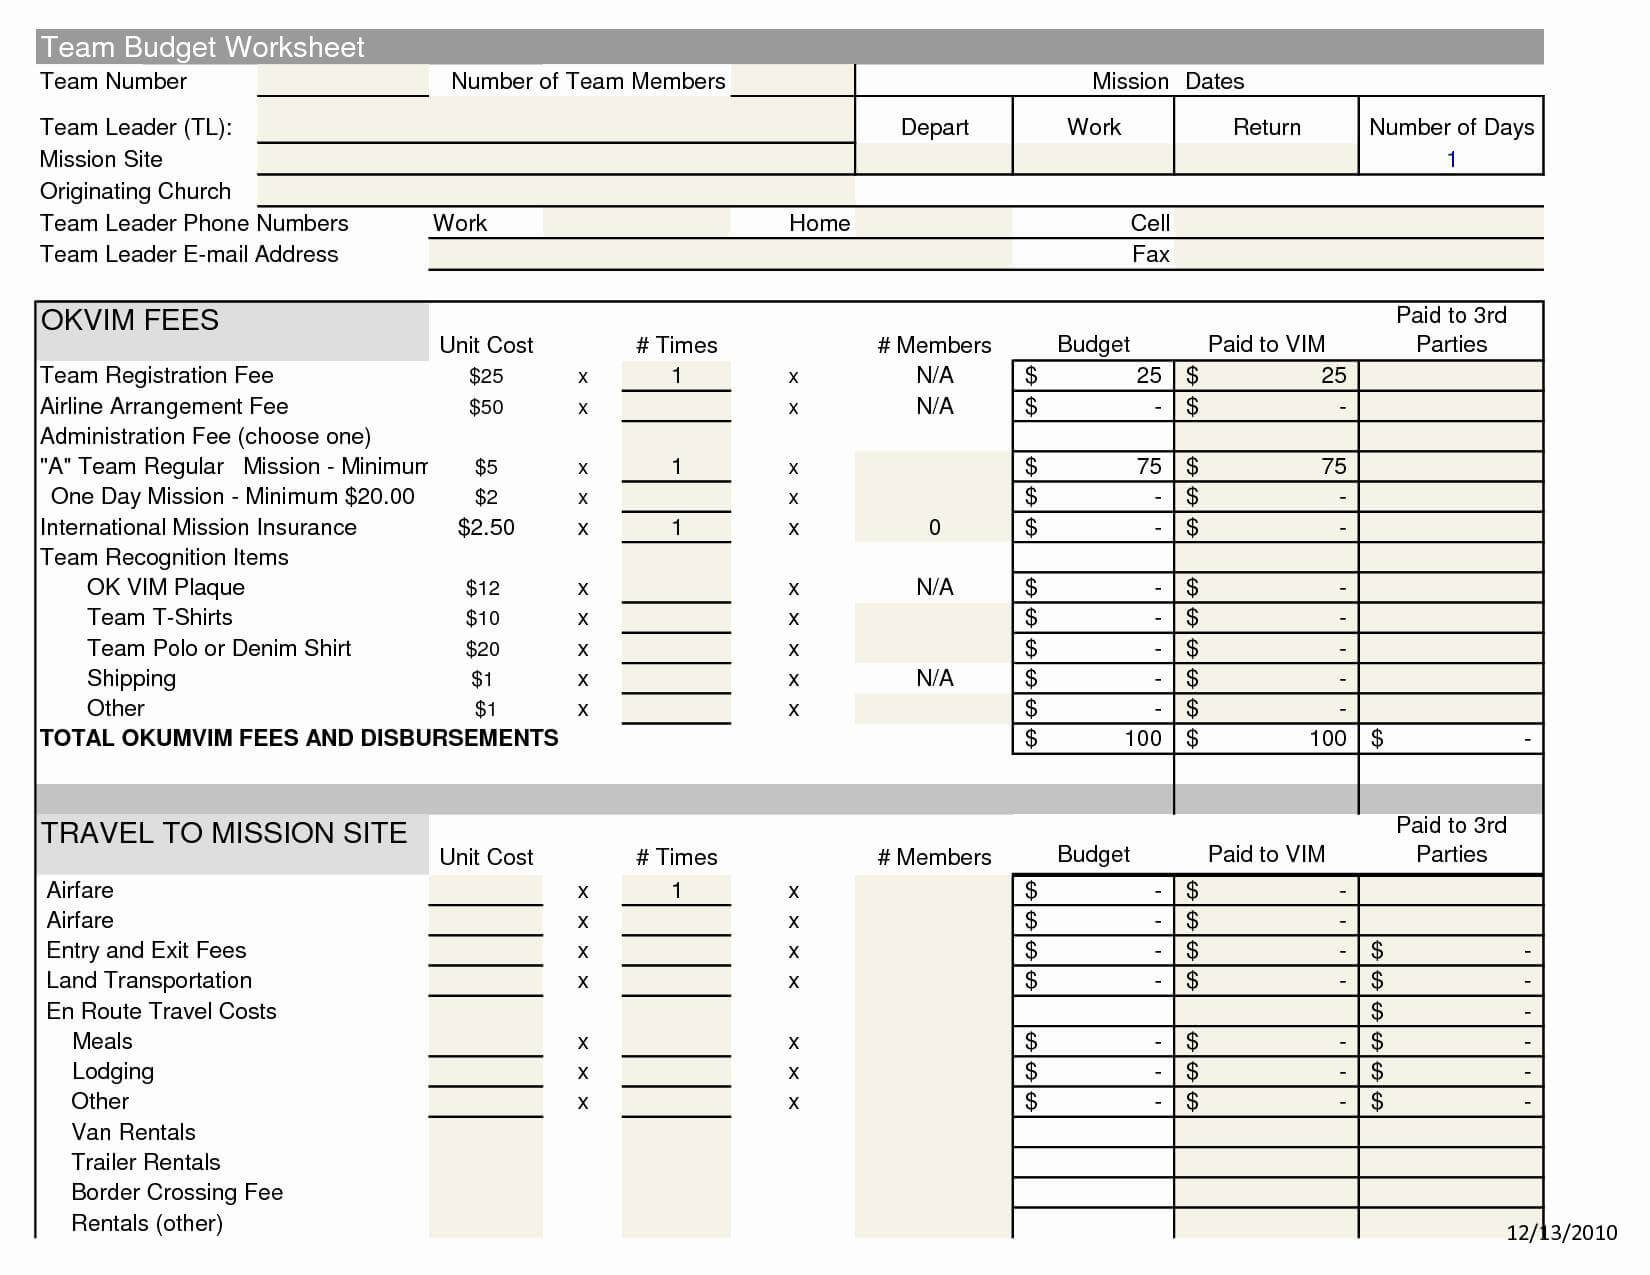 Annual Ancial Report Template Process Street Powerpoint Throughout Excel Financial Report Templates